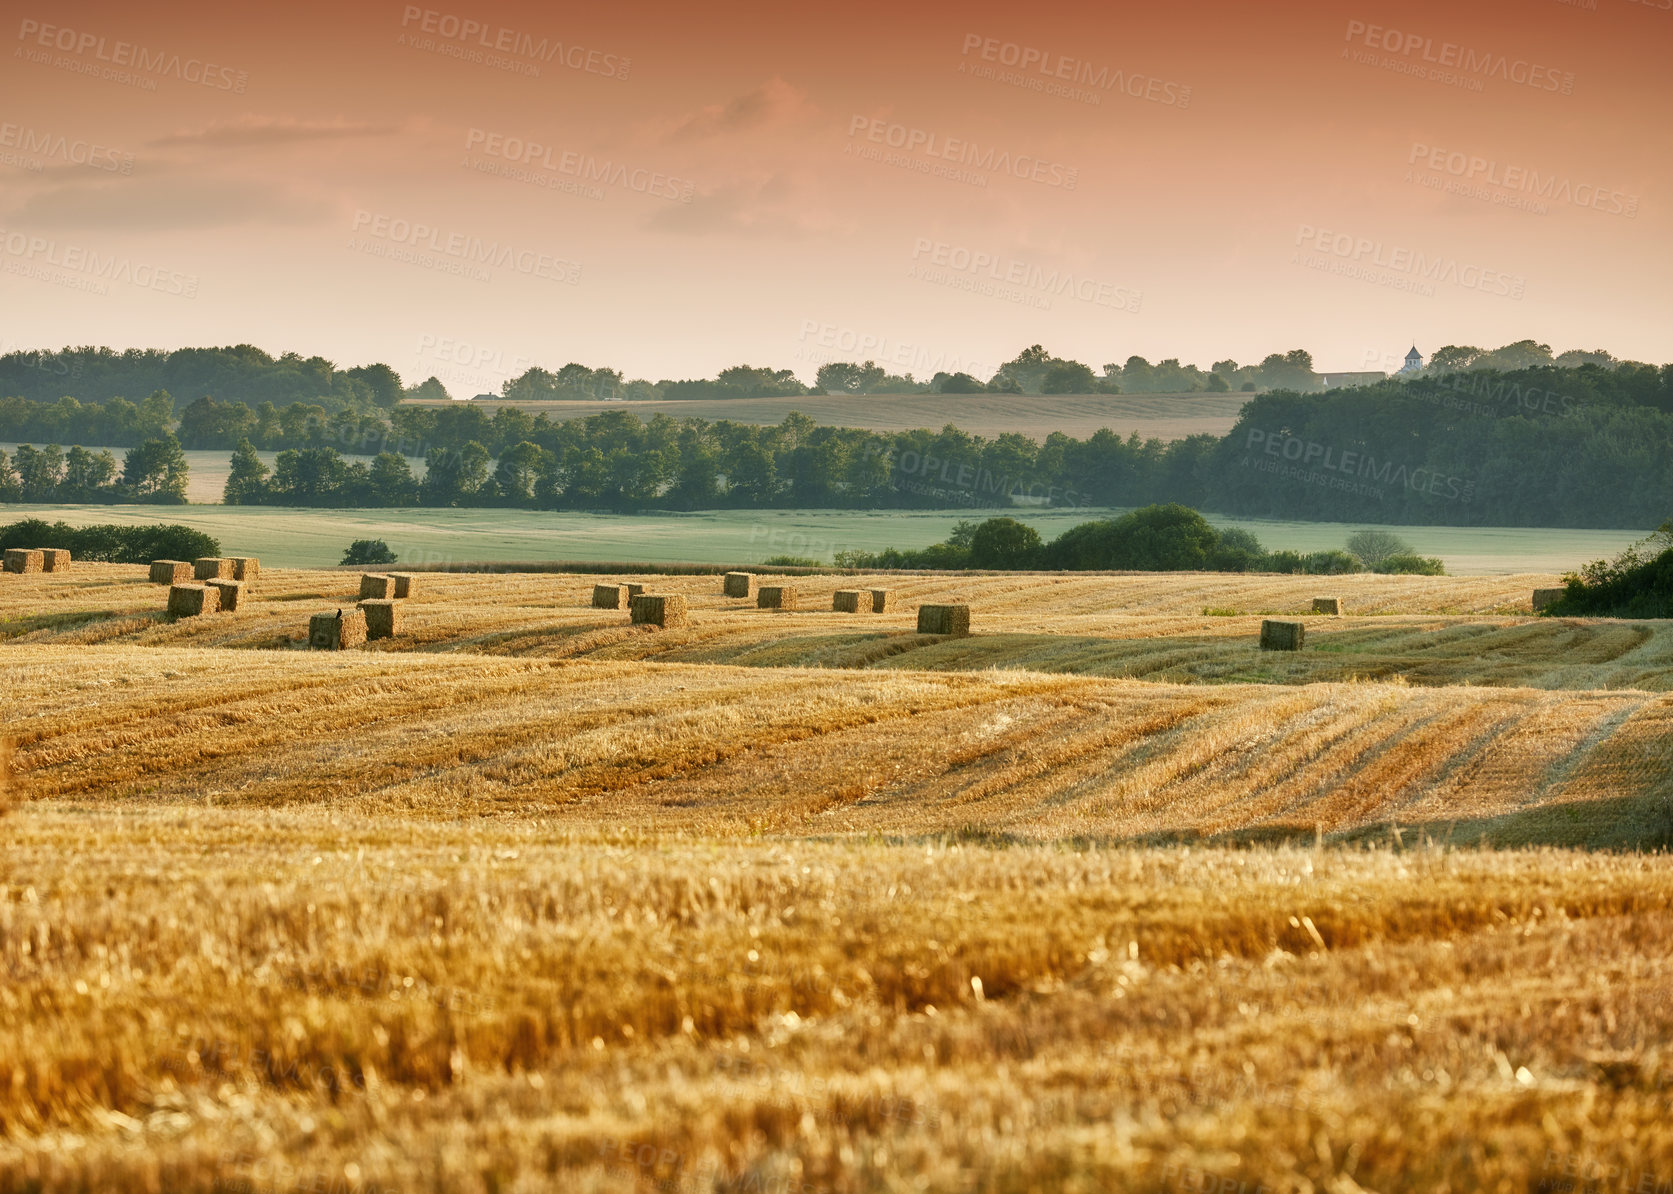 Buy stock photo Organic and sustainable farming of rye or barley grain in the countryside with copy space. Landscape of a yellow wheat field ready for harvest, growing on a rural farm with a lake in the background.